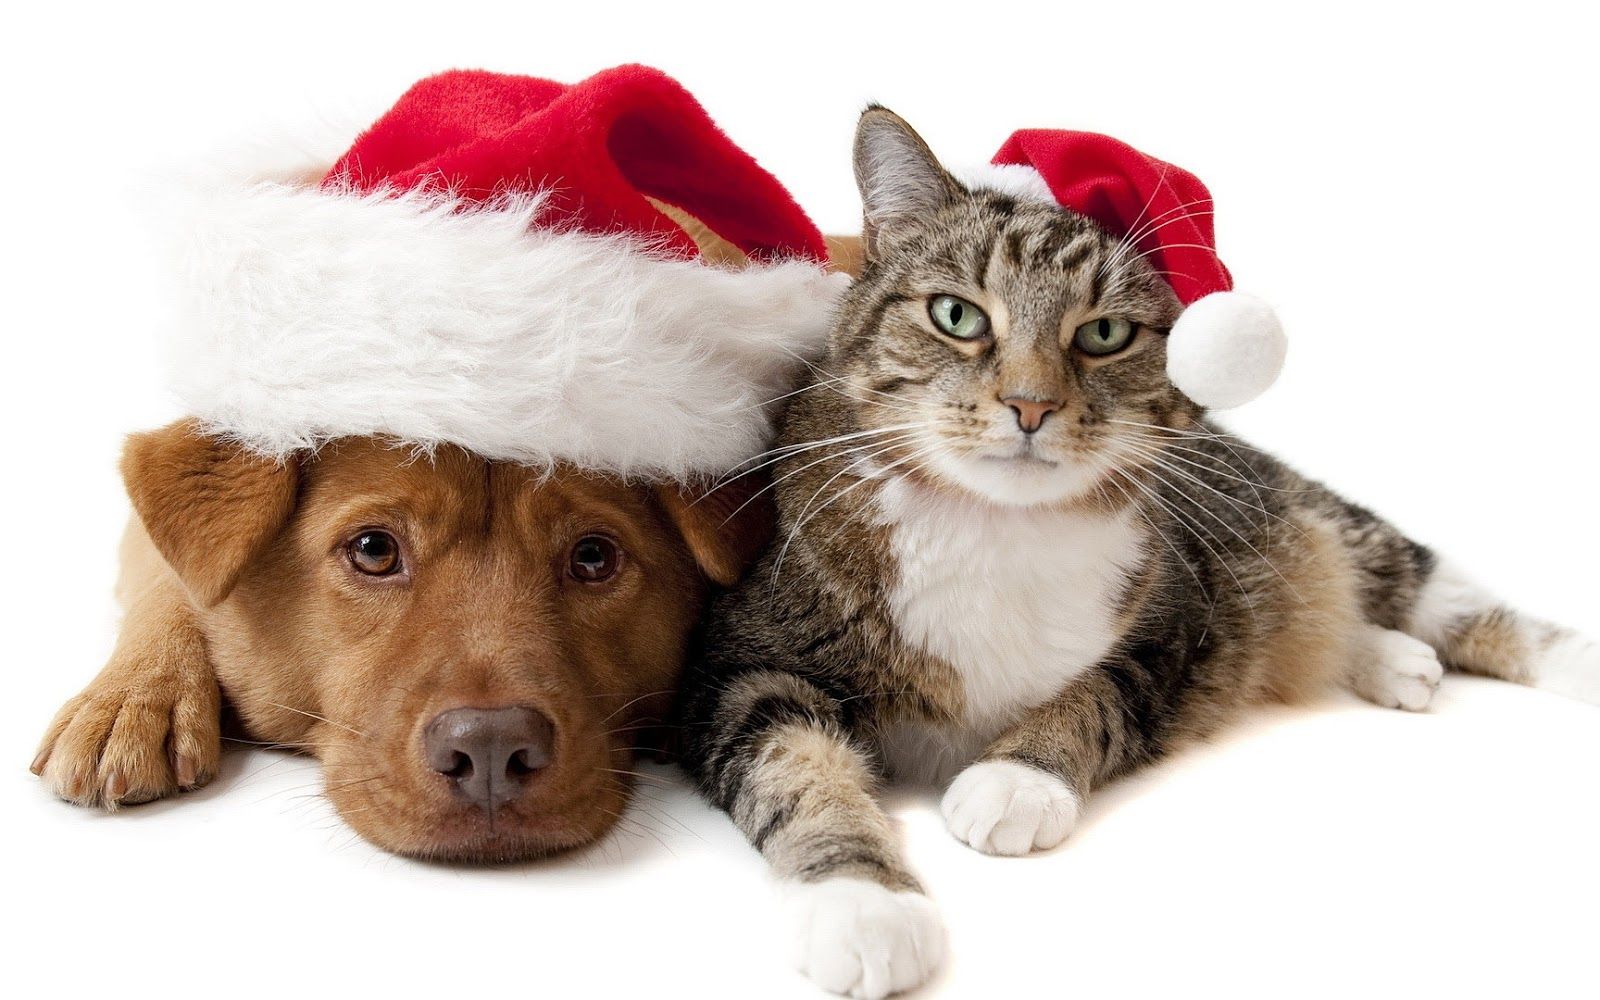 Christmas Wallpaper With A Cat And A Dog Wearing Christmas Hats Hd Cat And Dog Wallpaper